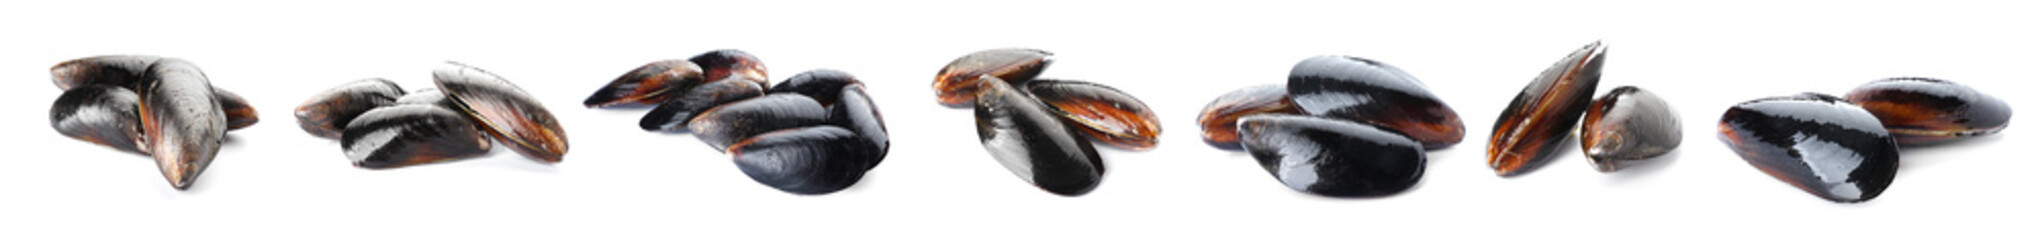 Set of fresh mussels on white background